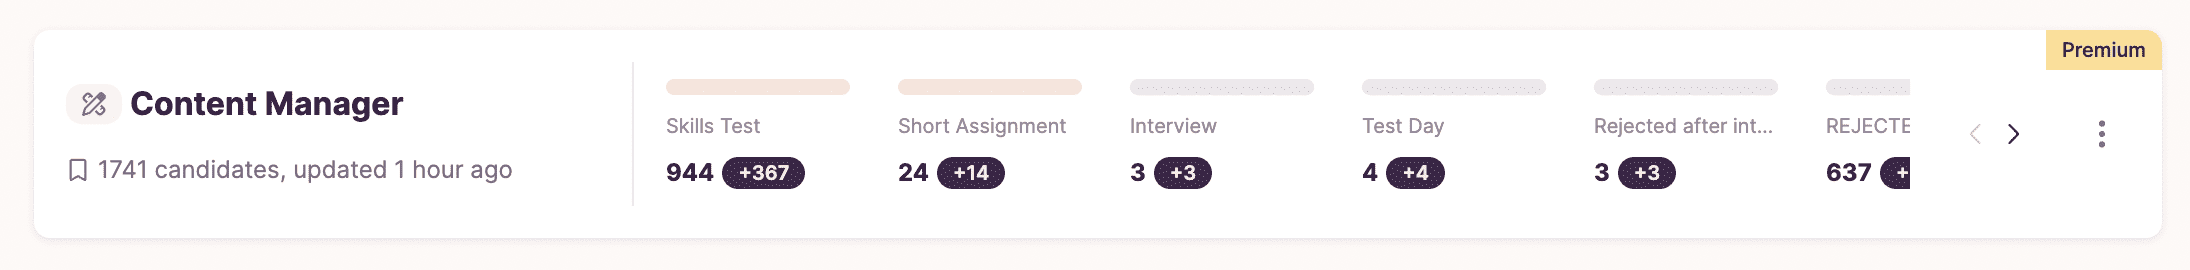 content manager skills test pipeline on Toggl Hire